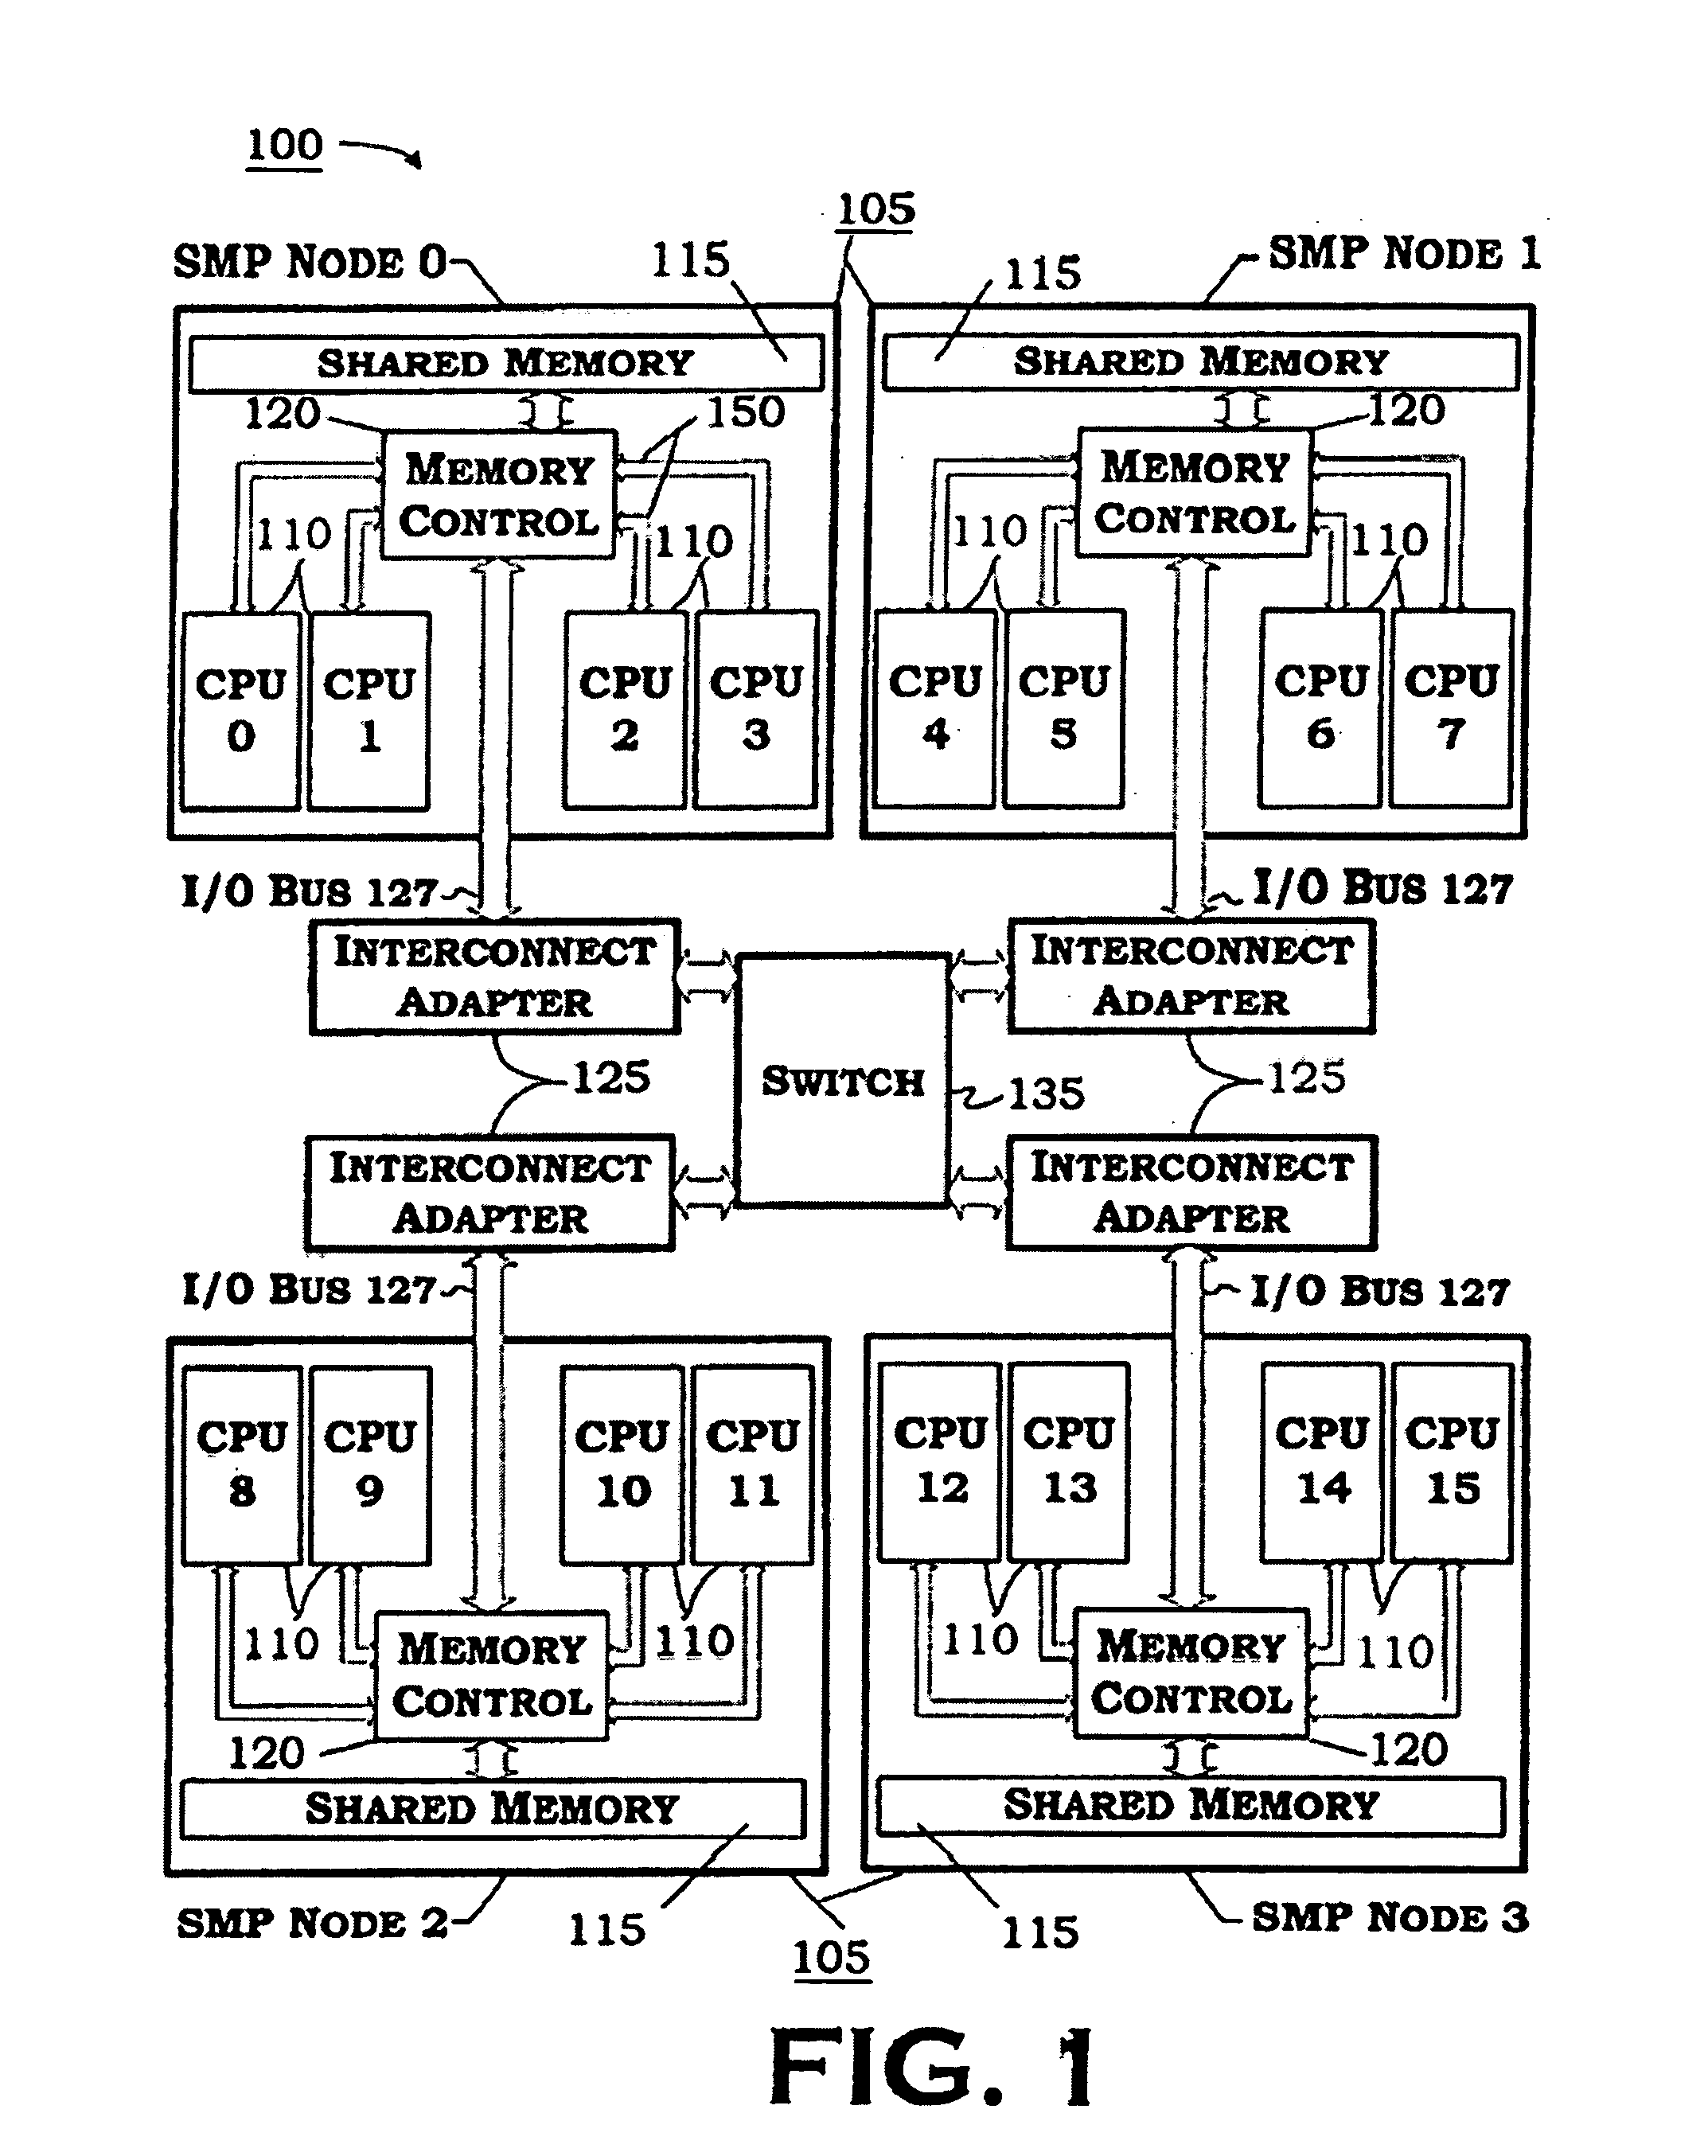 Default locality selection for memory objects based on determining the type of a particular memory object